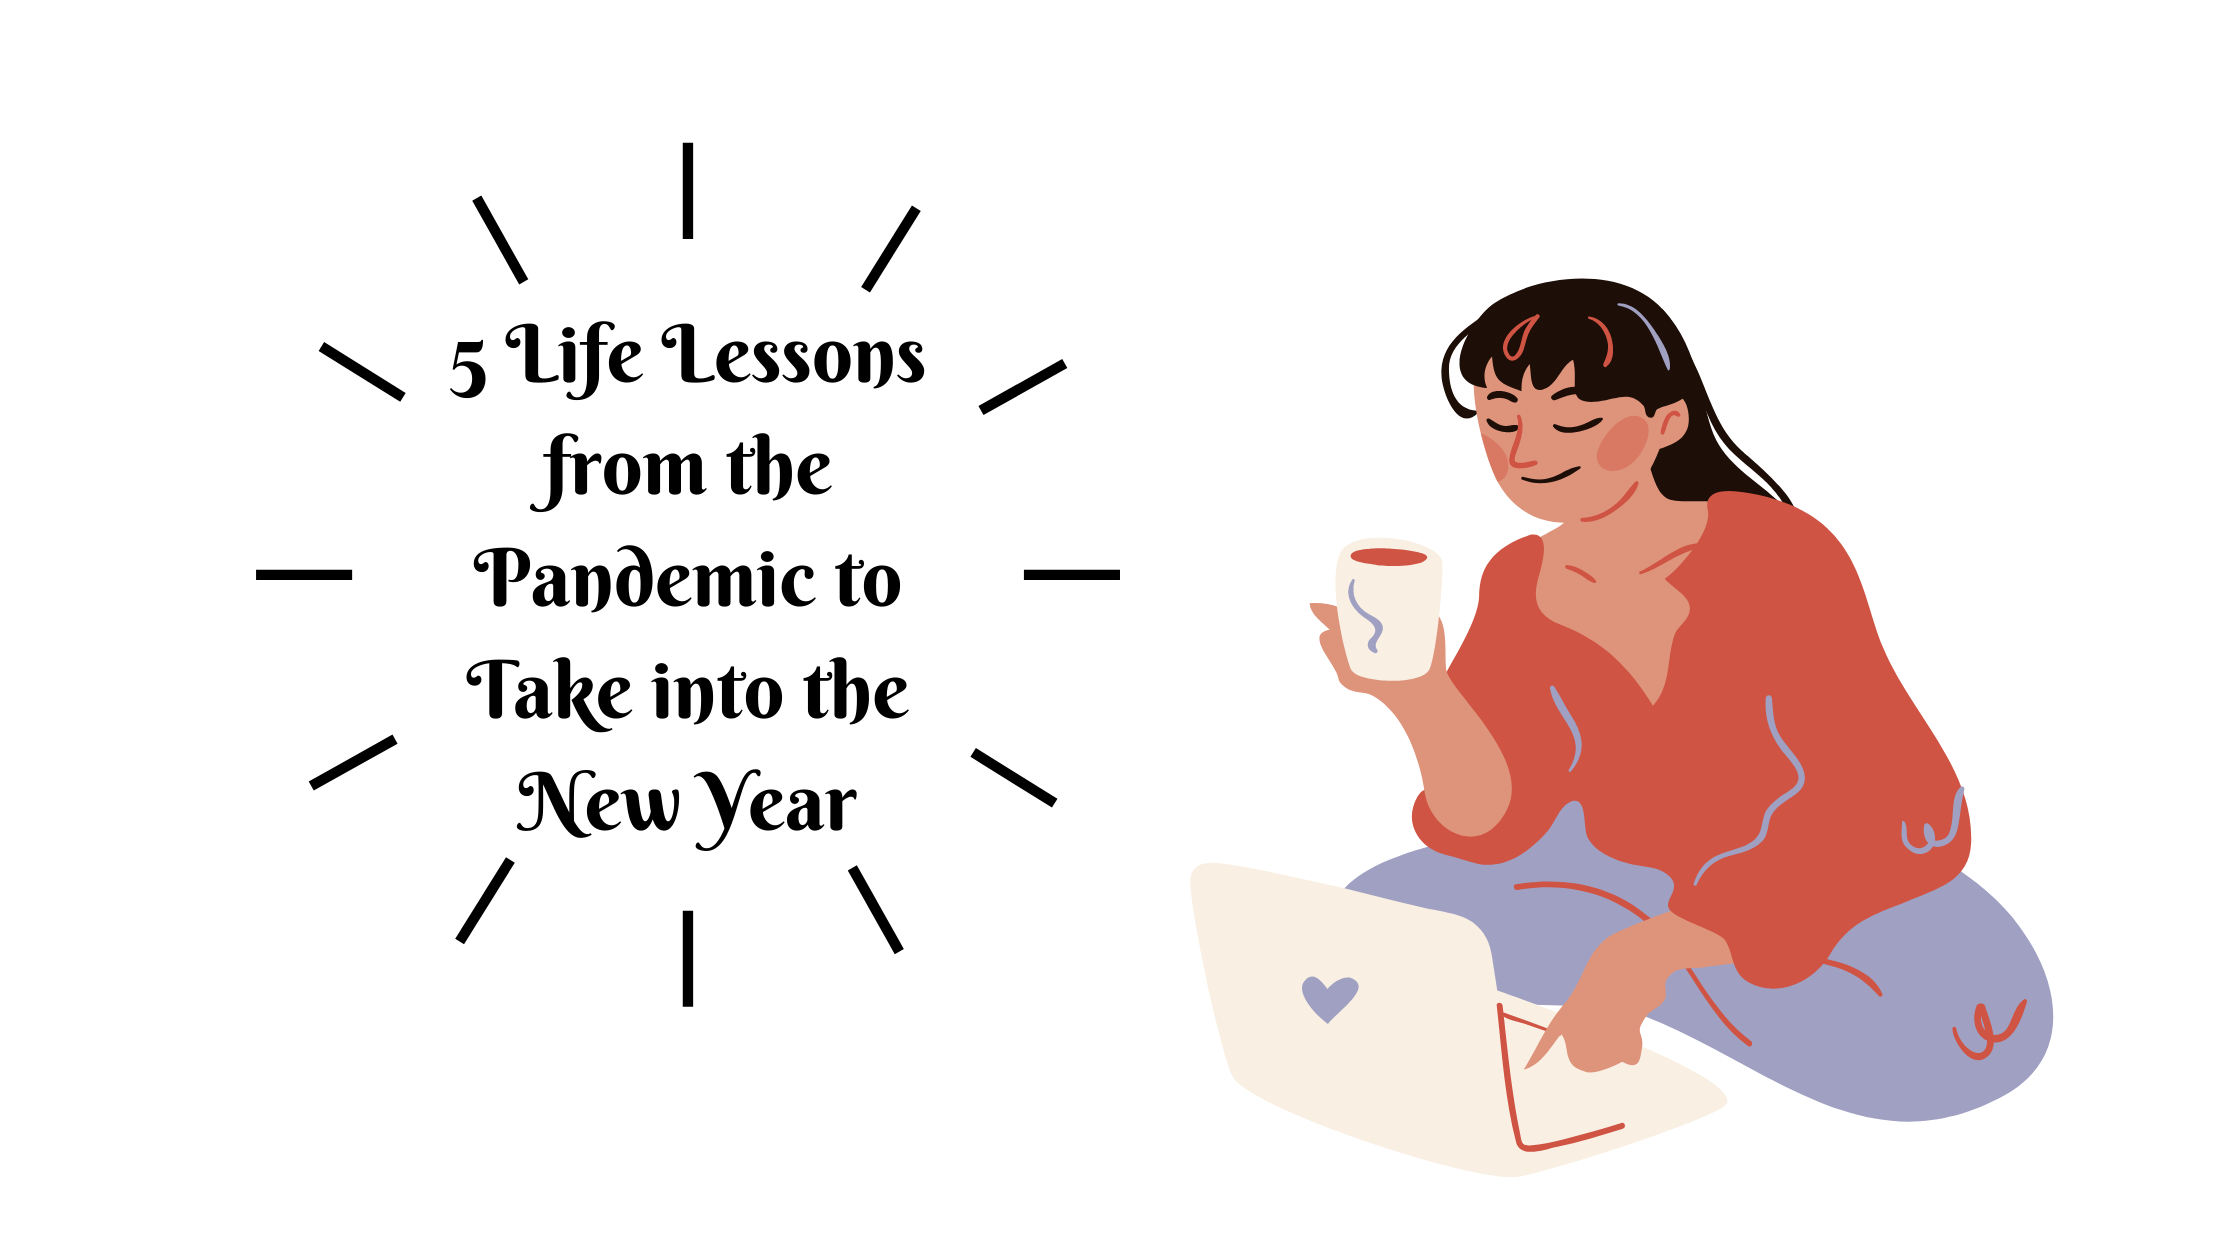 5 Life Lessons from the Pandemic to Take into the New Year YouAlberta